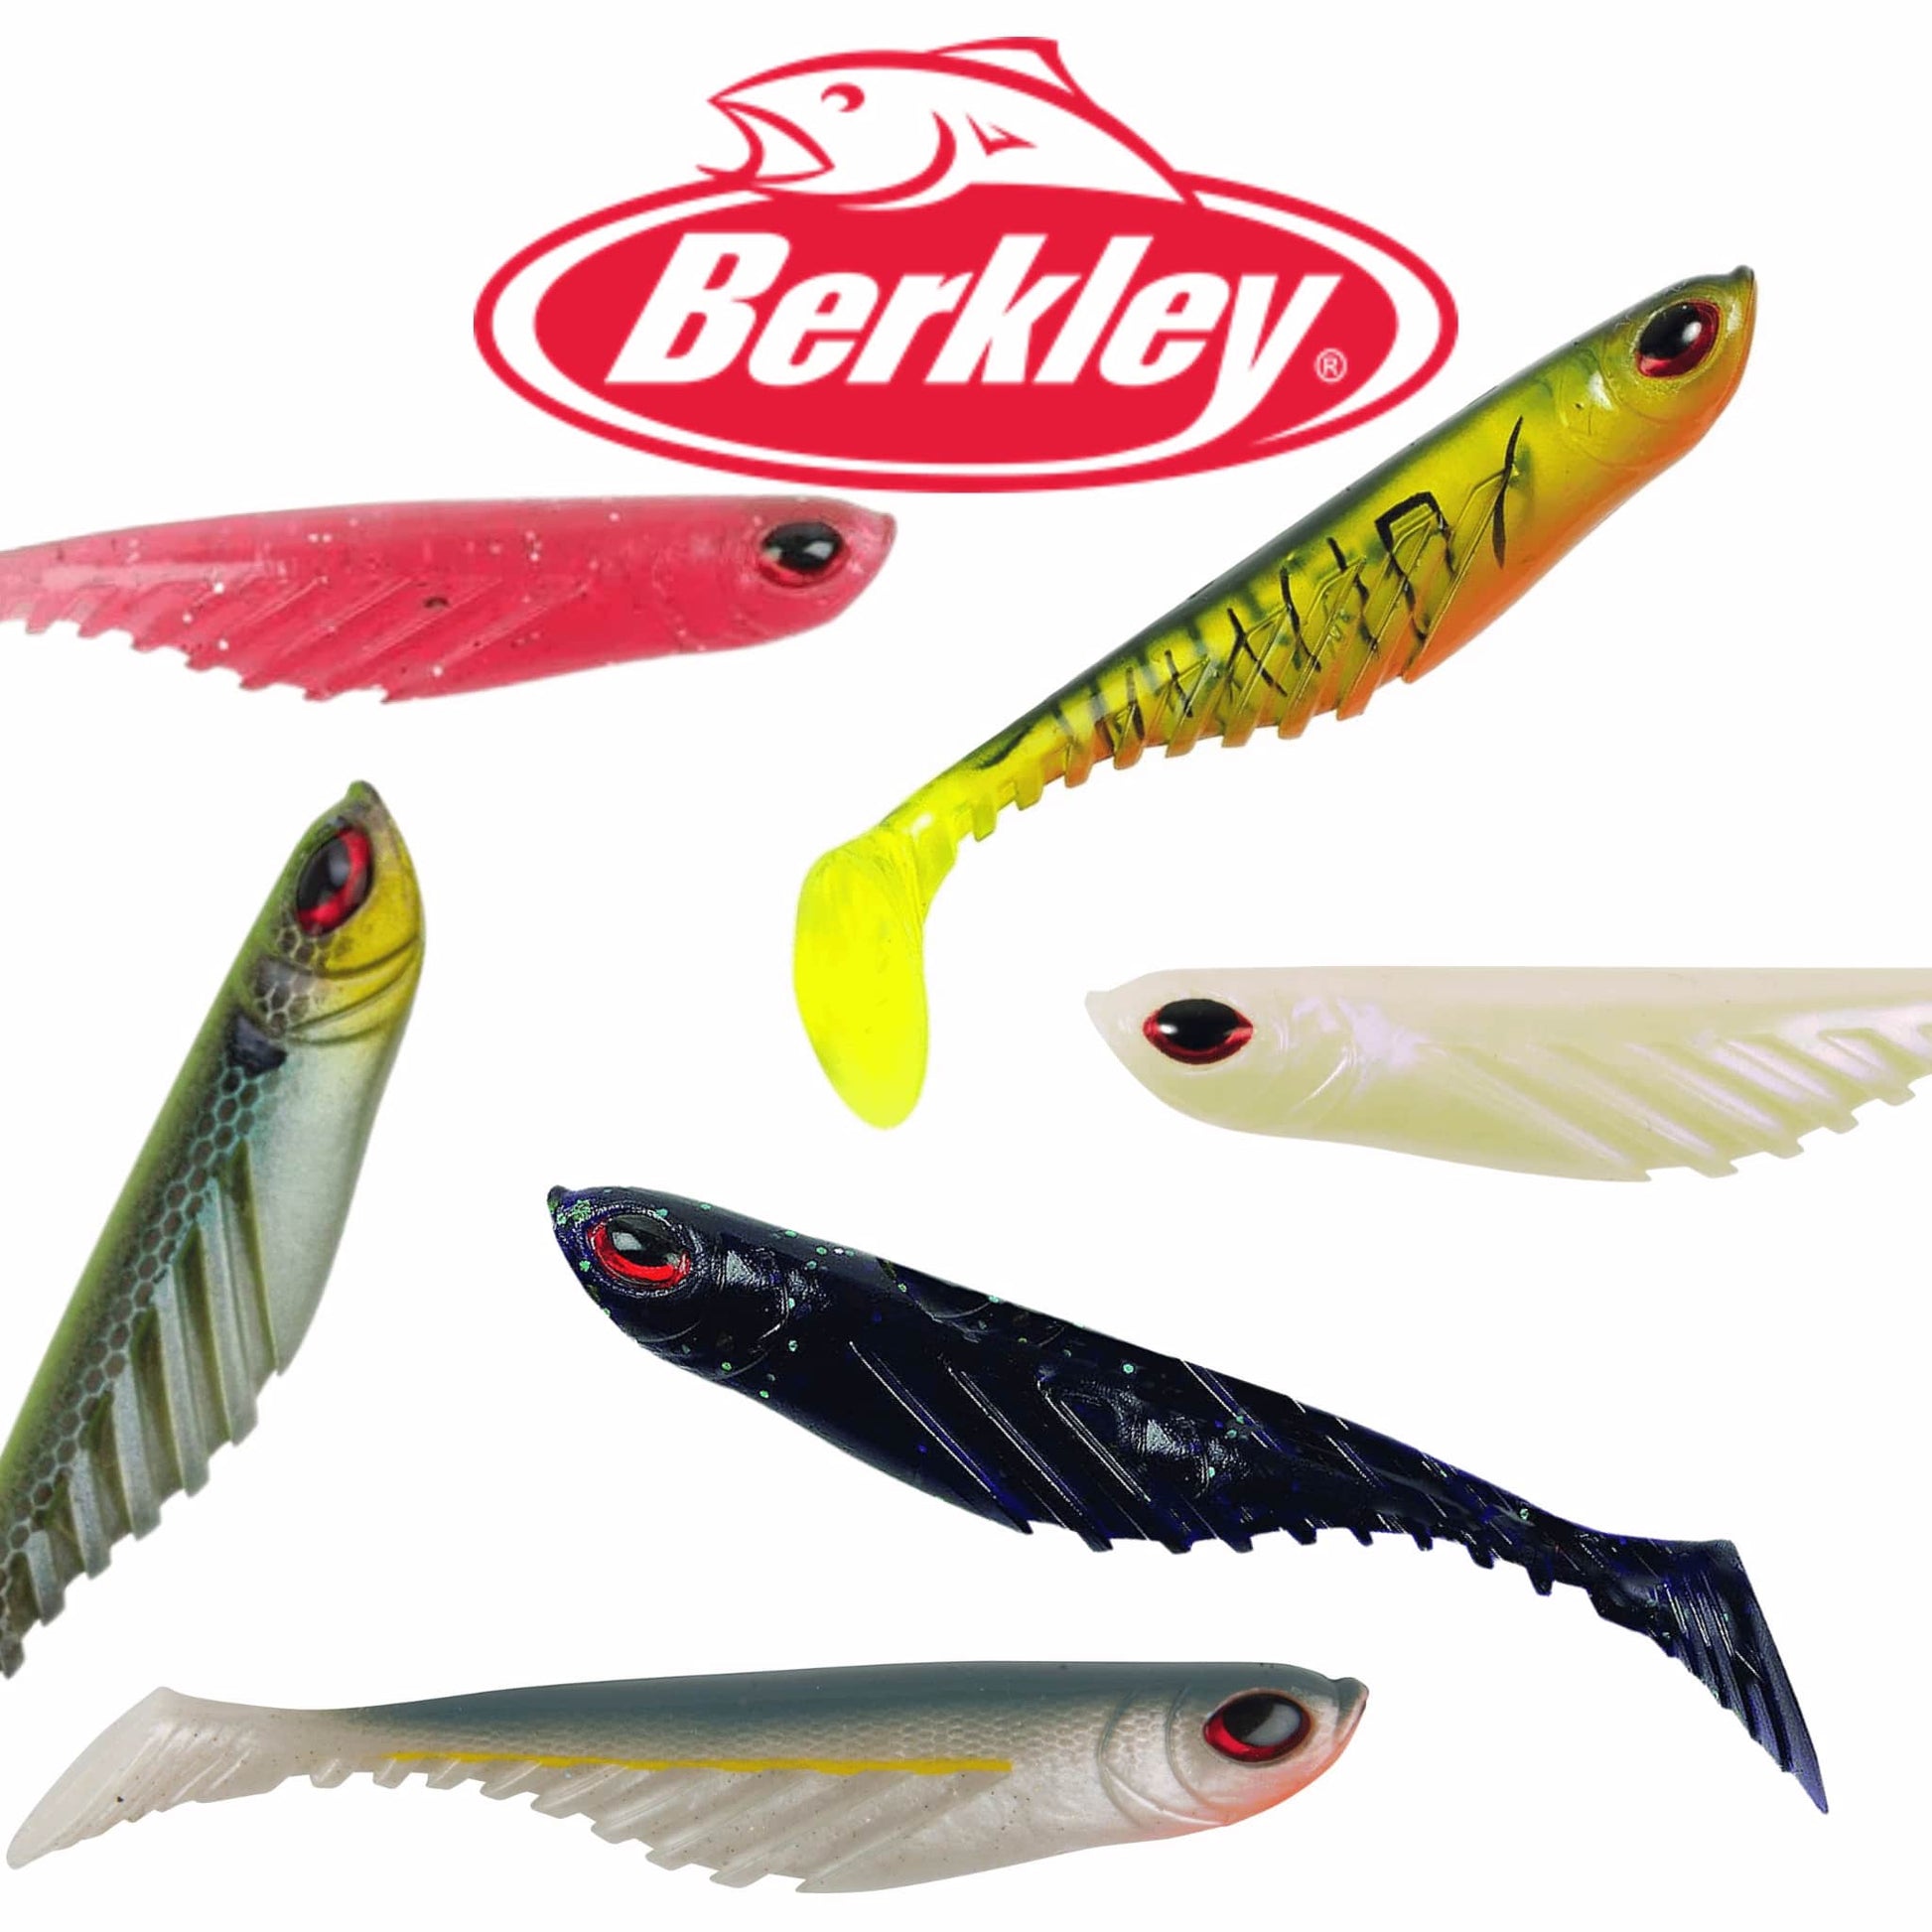 Berkley PowerBait Ripple Shad 4 Inch Paddle Tail Rigged Lure Jig Texas Carolina Perch Pike Scented Fishing Lure